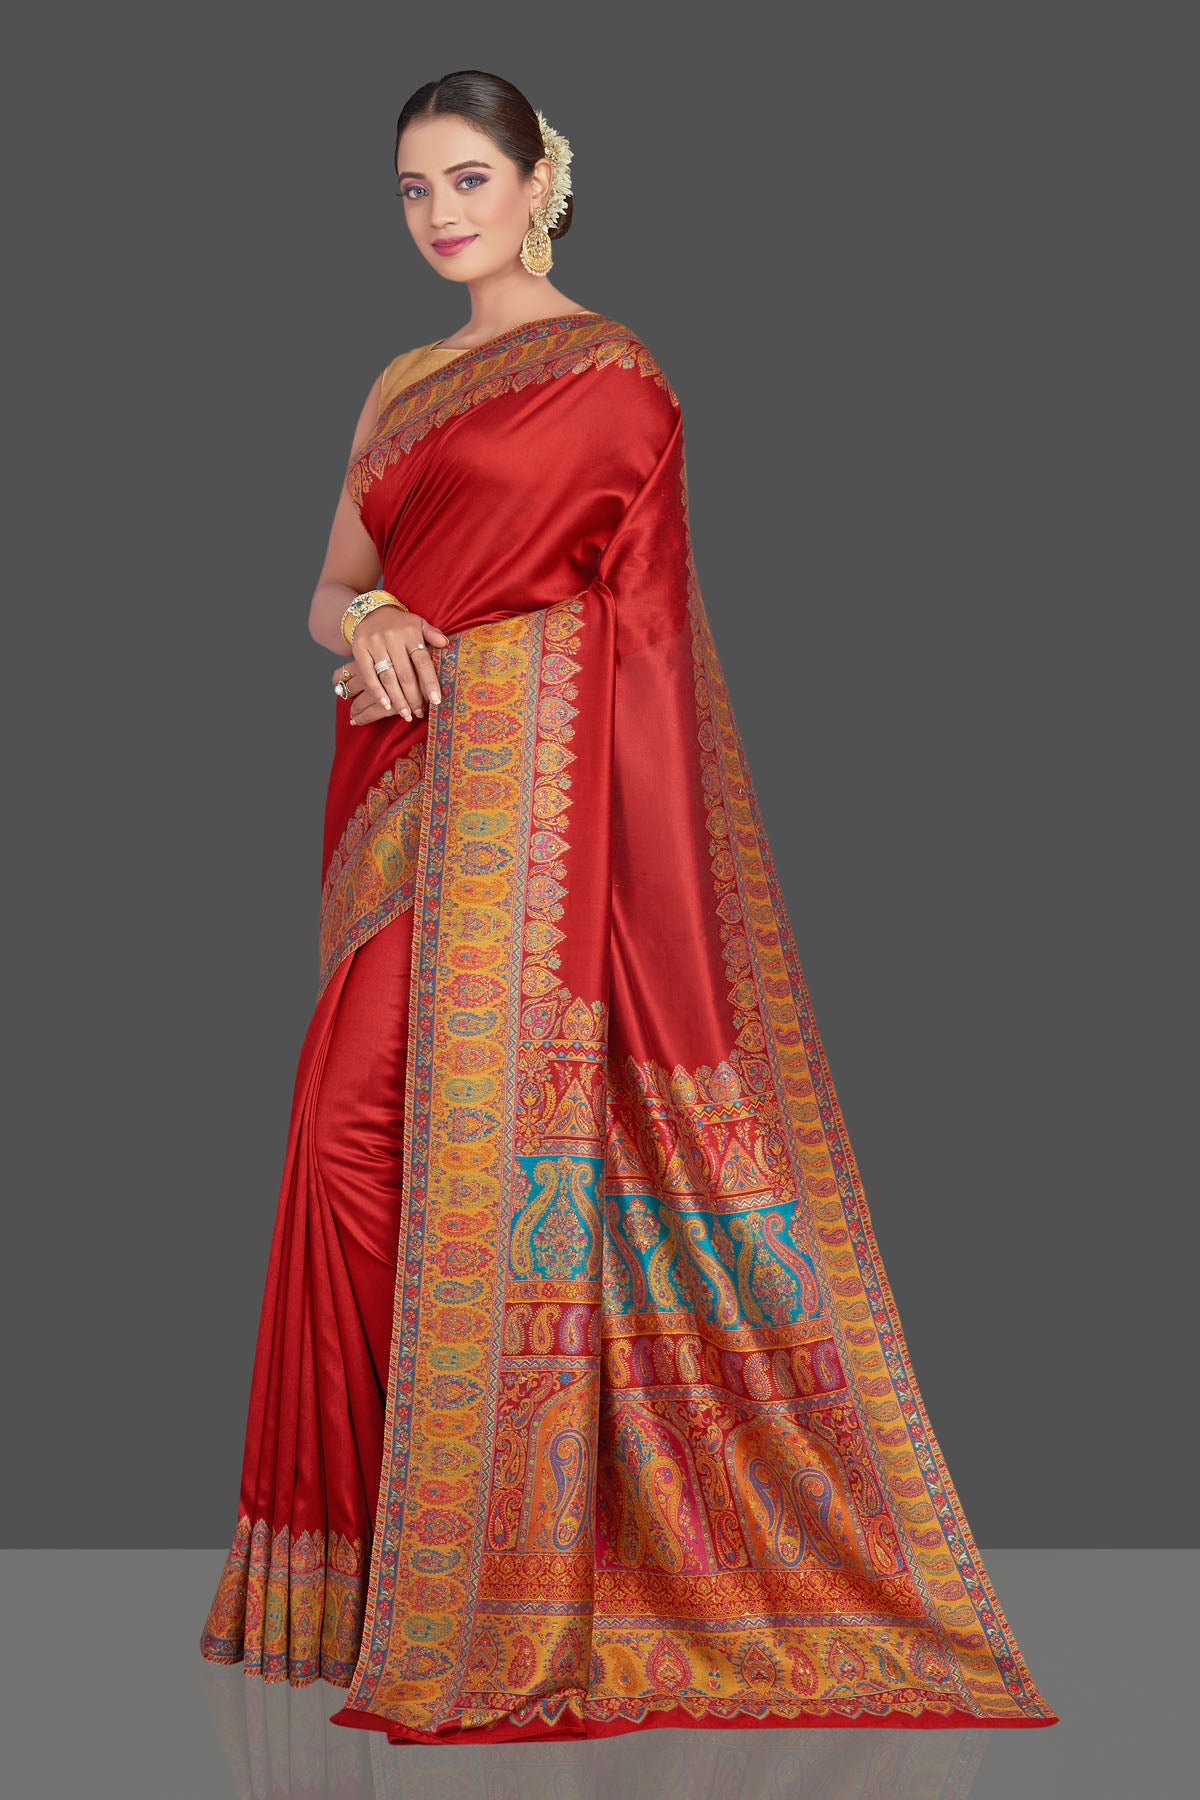 Buy stunning red Kani weave tussar muga silk sari online in USA. Make your presence felt on special occasions in beautiful embroidered sarees, handwoven saris, pure silk saris, tussar sarees from Pure Elegance Indian saree store in USA.-pallu